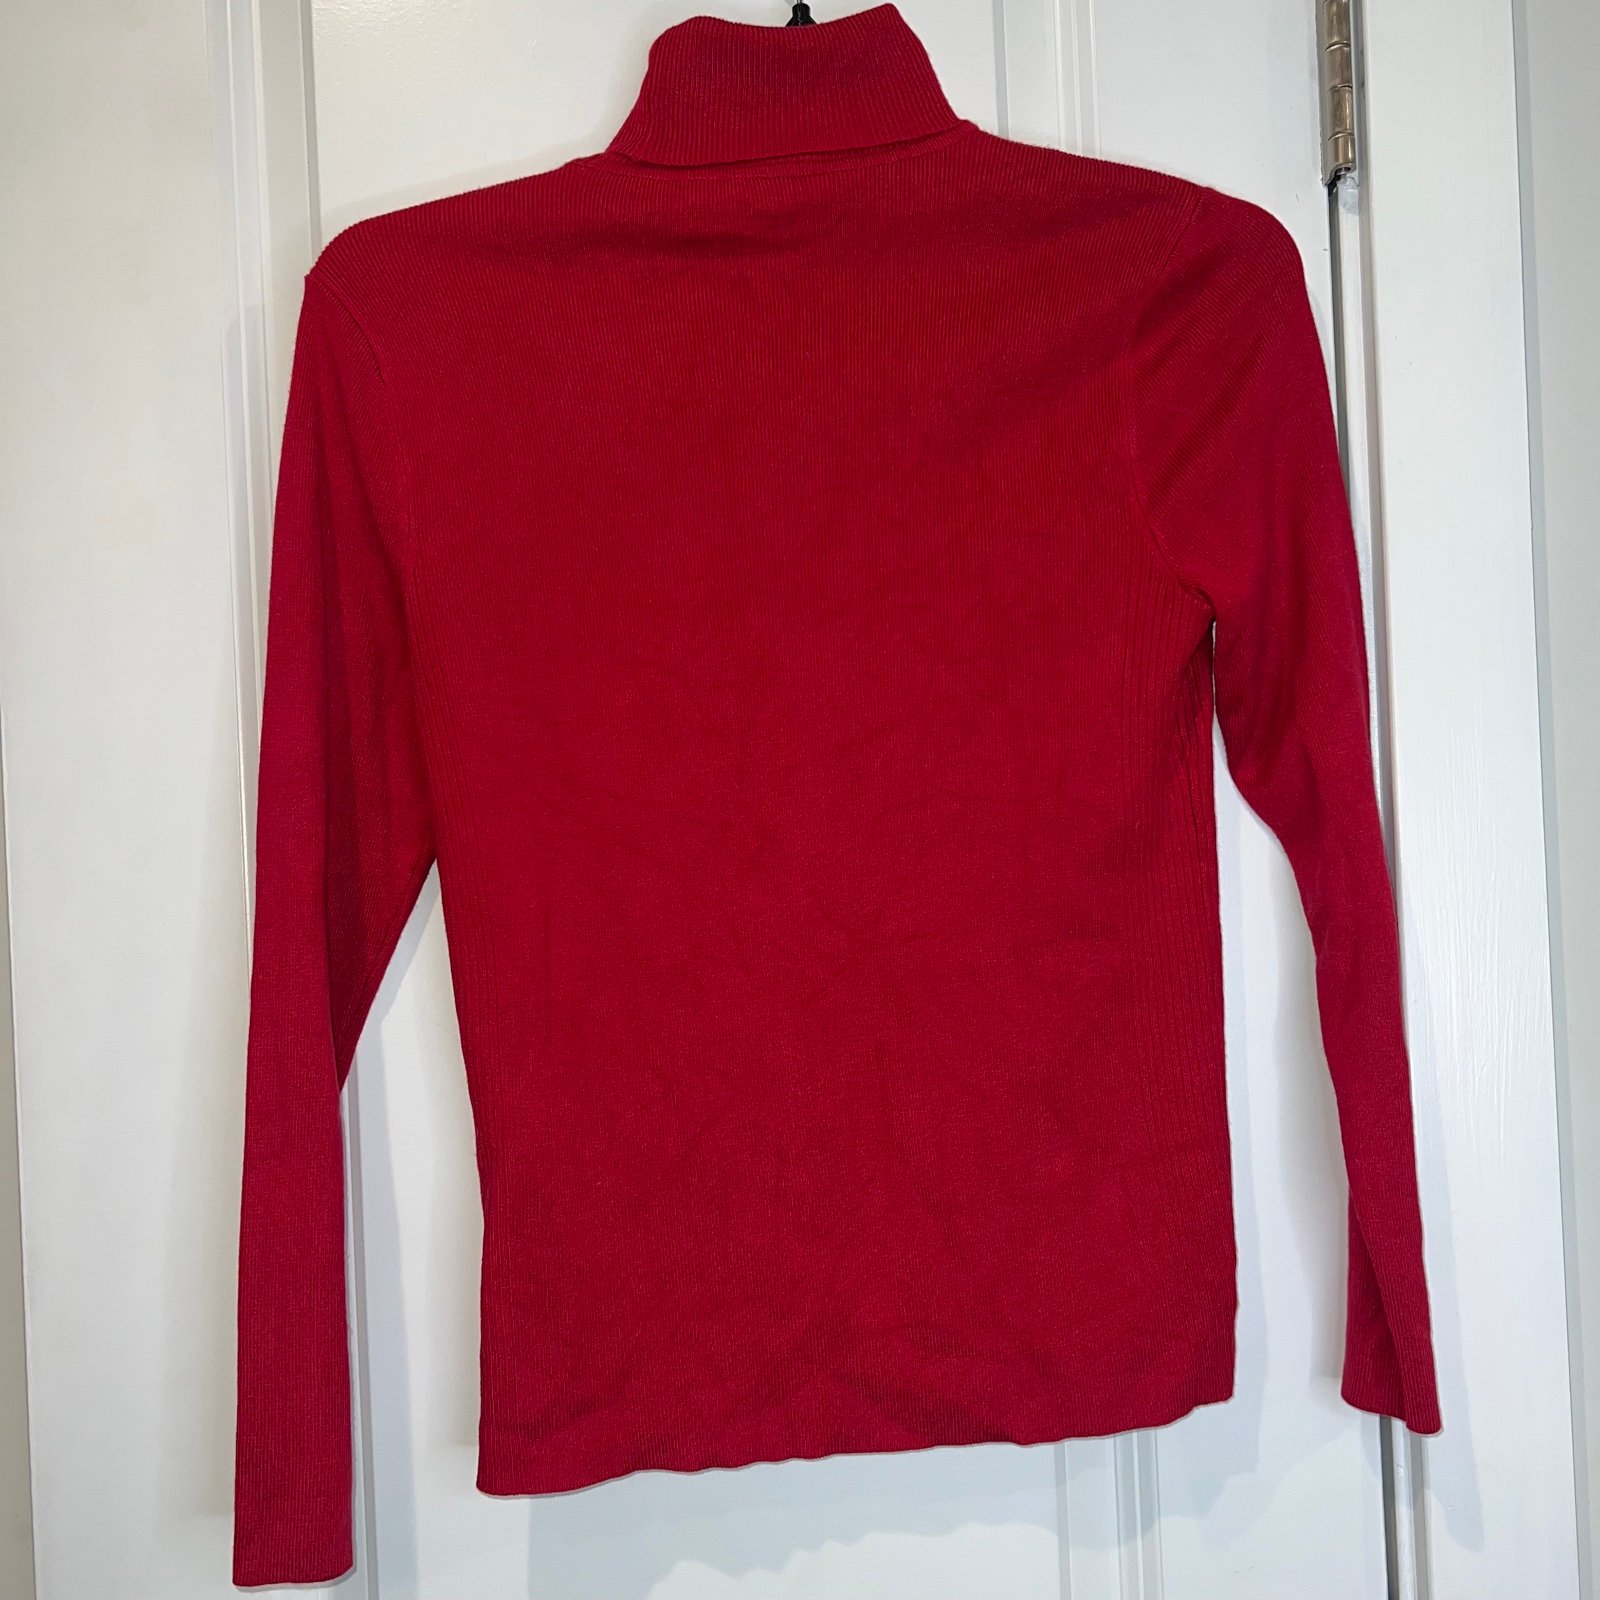 Personality Chicos Womens Red Turtleneck Sweater KvbaS0ToE US Outlet